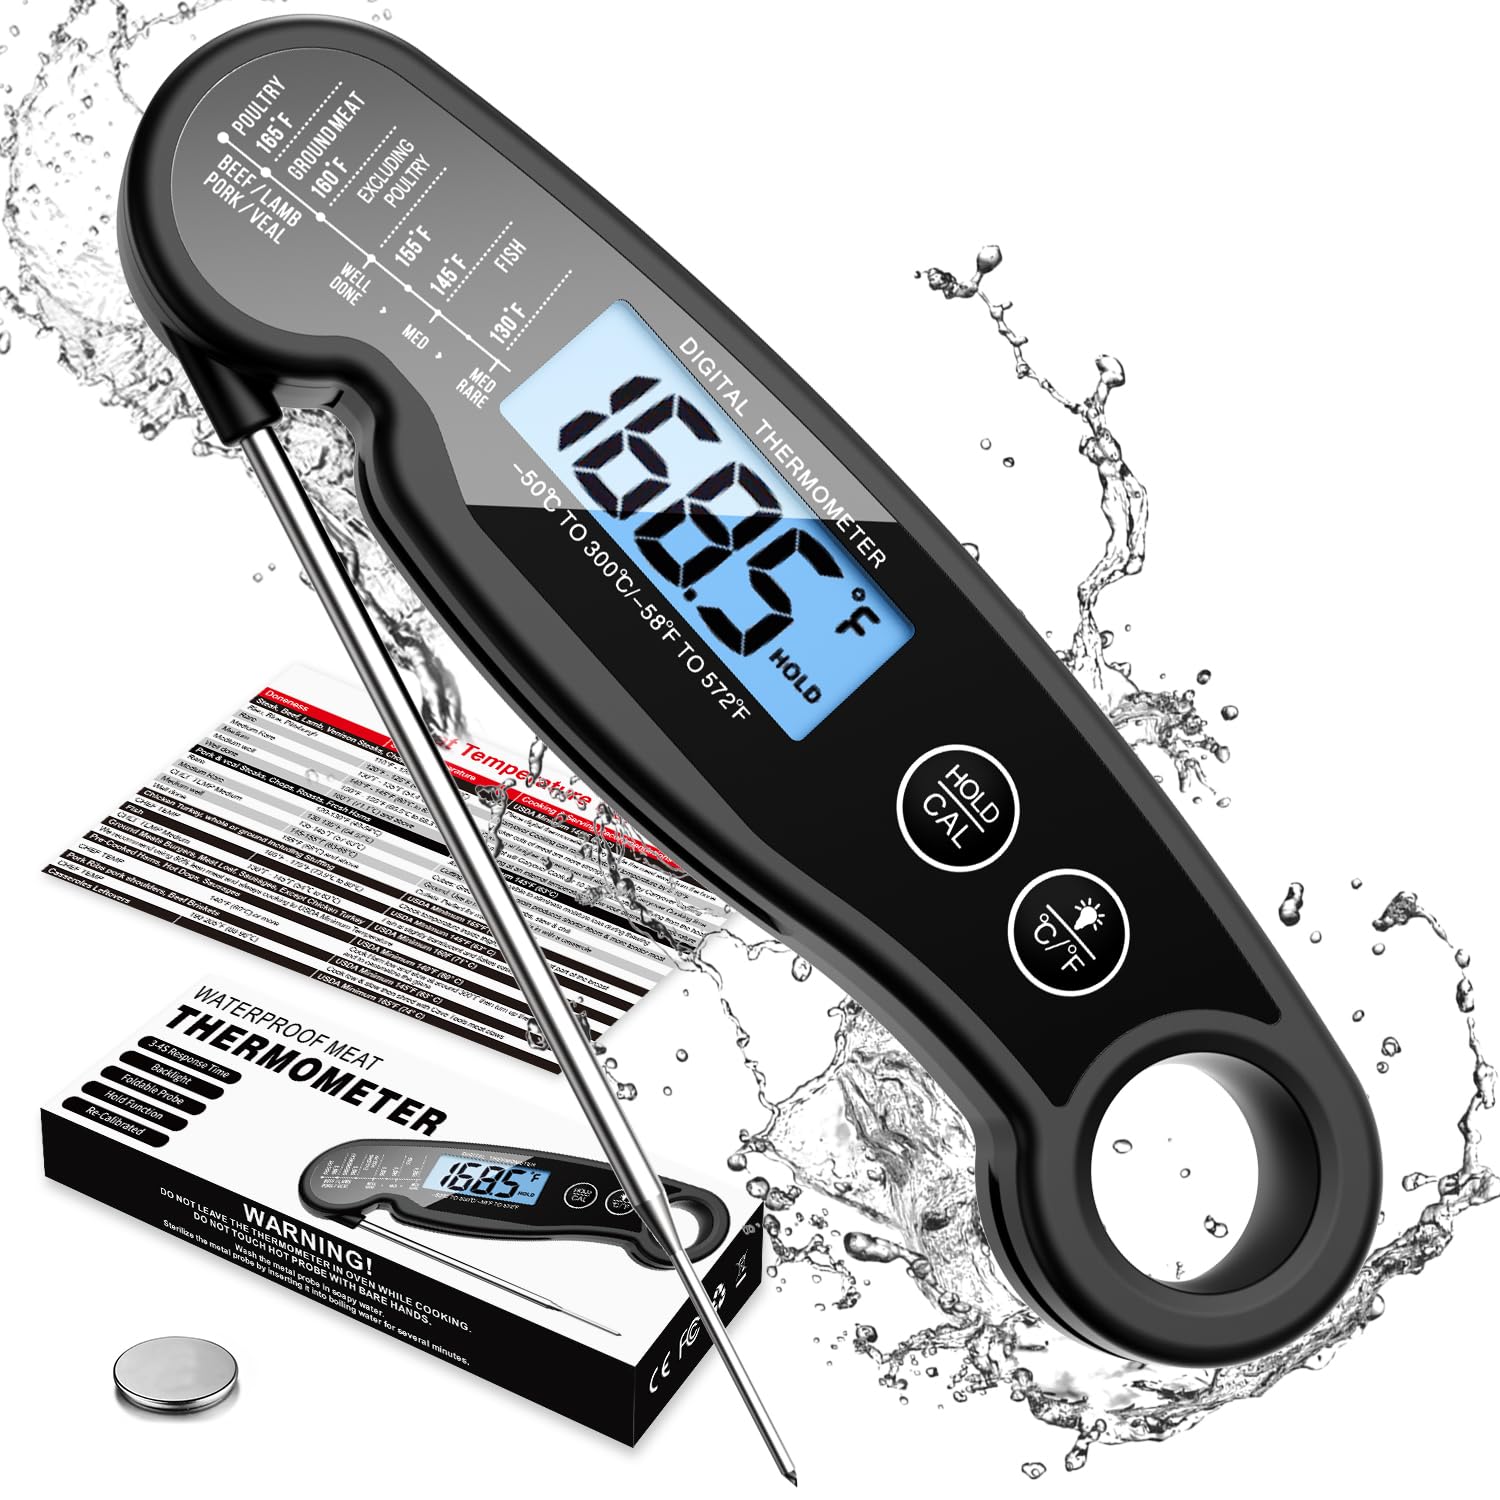 KT THERMO Candy/Deep Fry Thermometer with Instant Read,Dial Thermometer,12  Stainless Steel - Cooking Thermometers, Facebook Marketplace